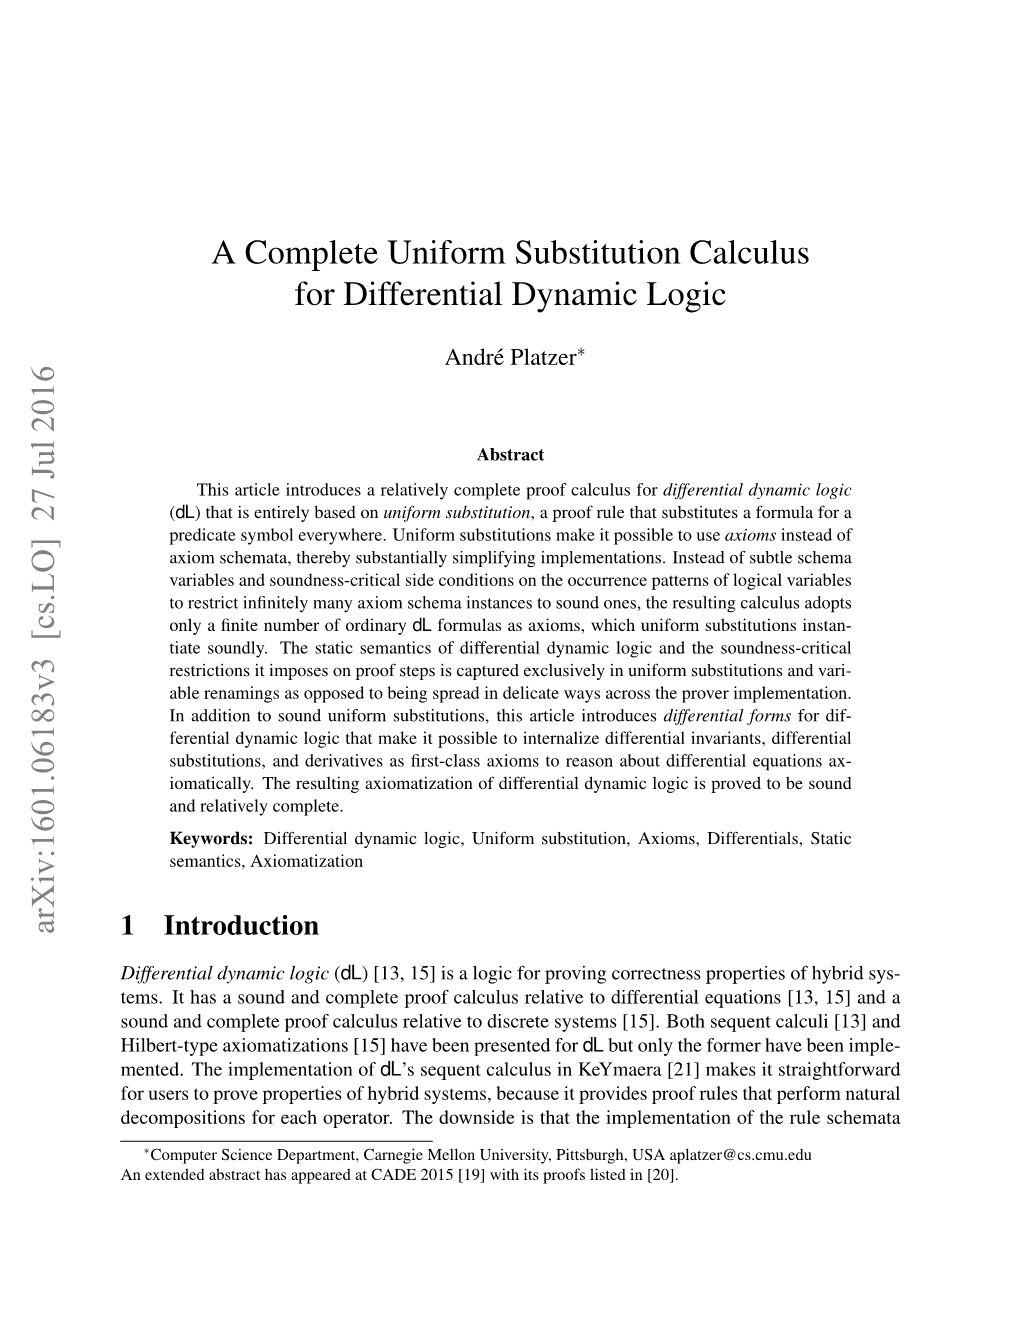 A Complete Uniform Substitution Calculus for Differential Dynamic Logic